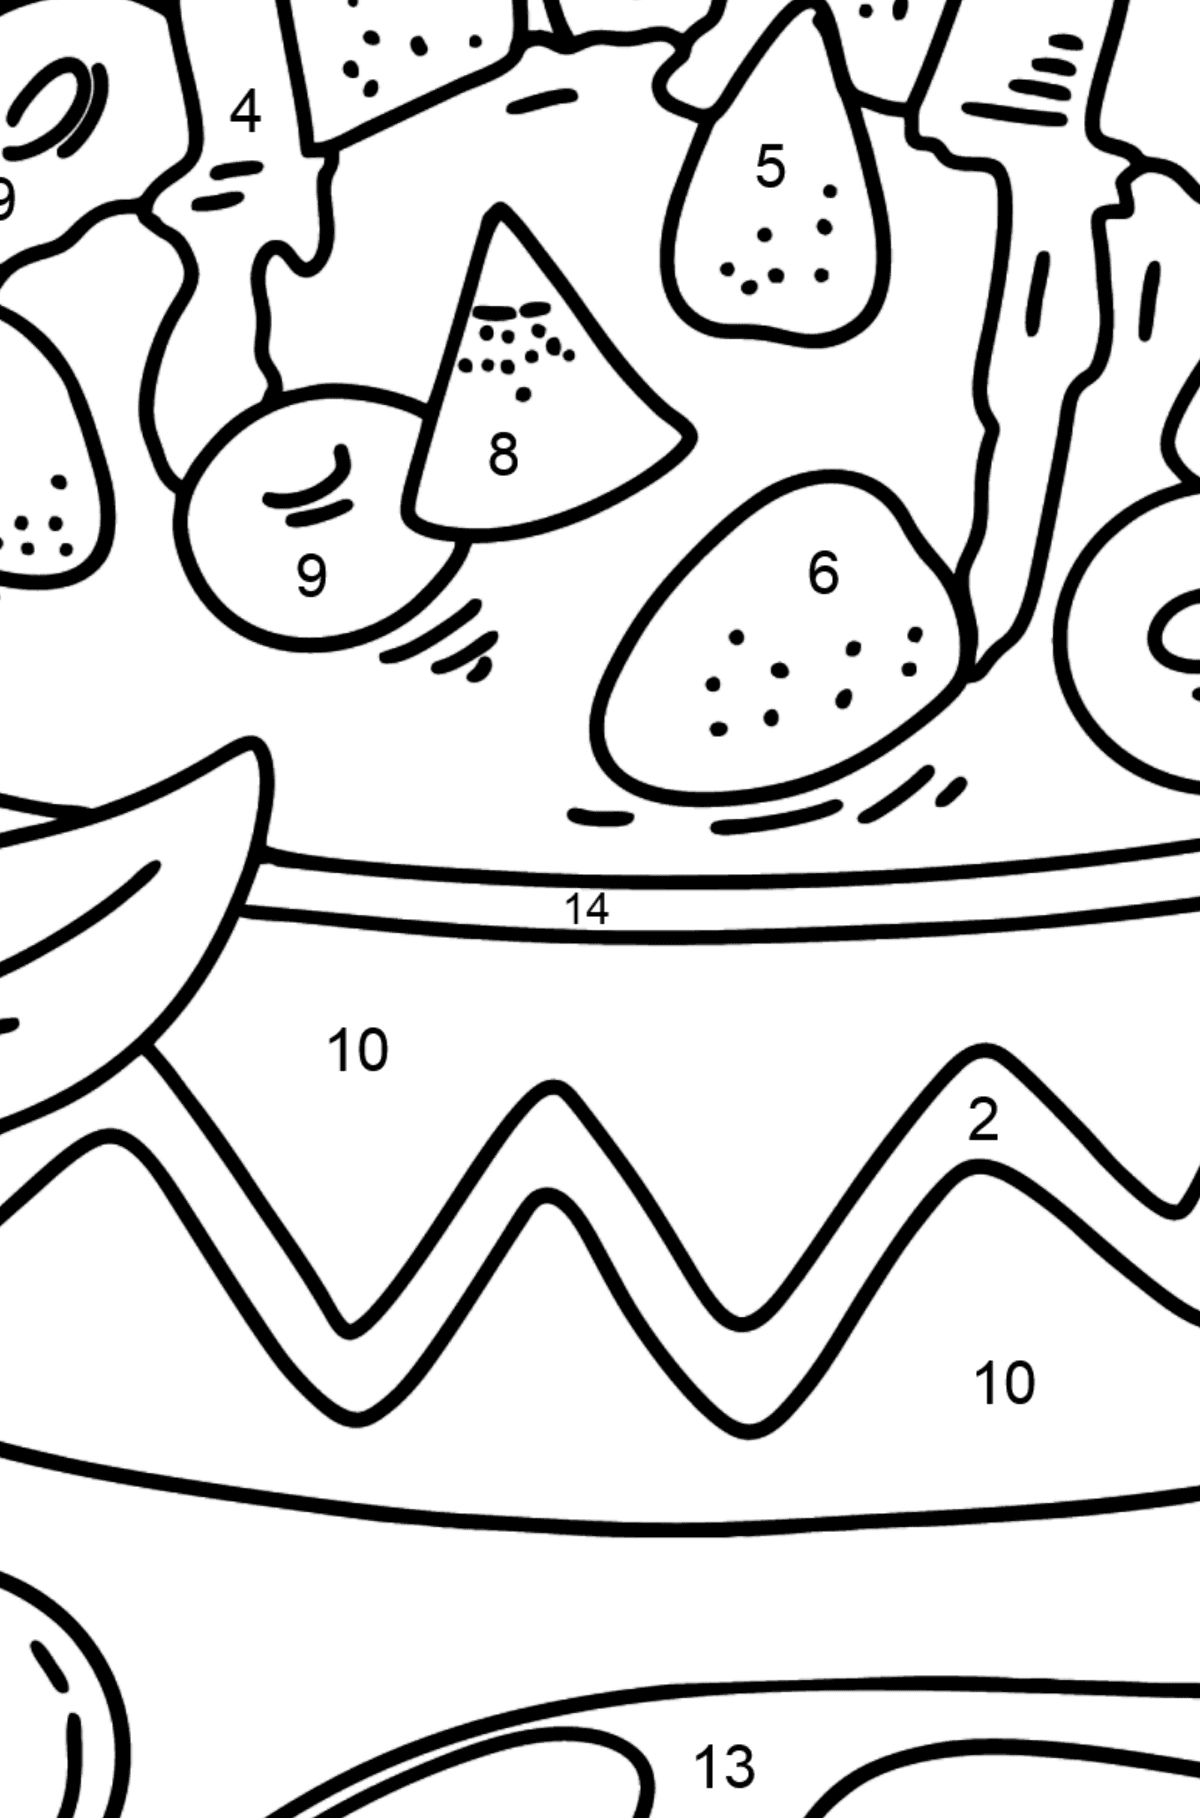 Porridge with Berries and Butter coloring page - Coloring by Numbers for Kids